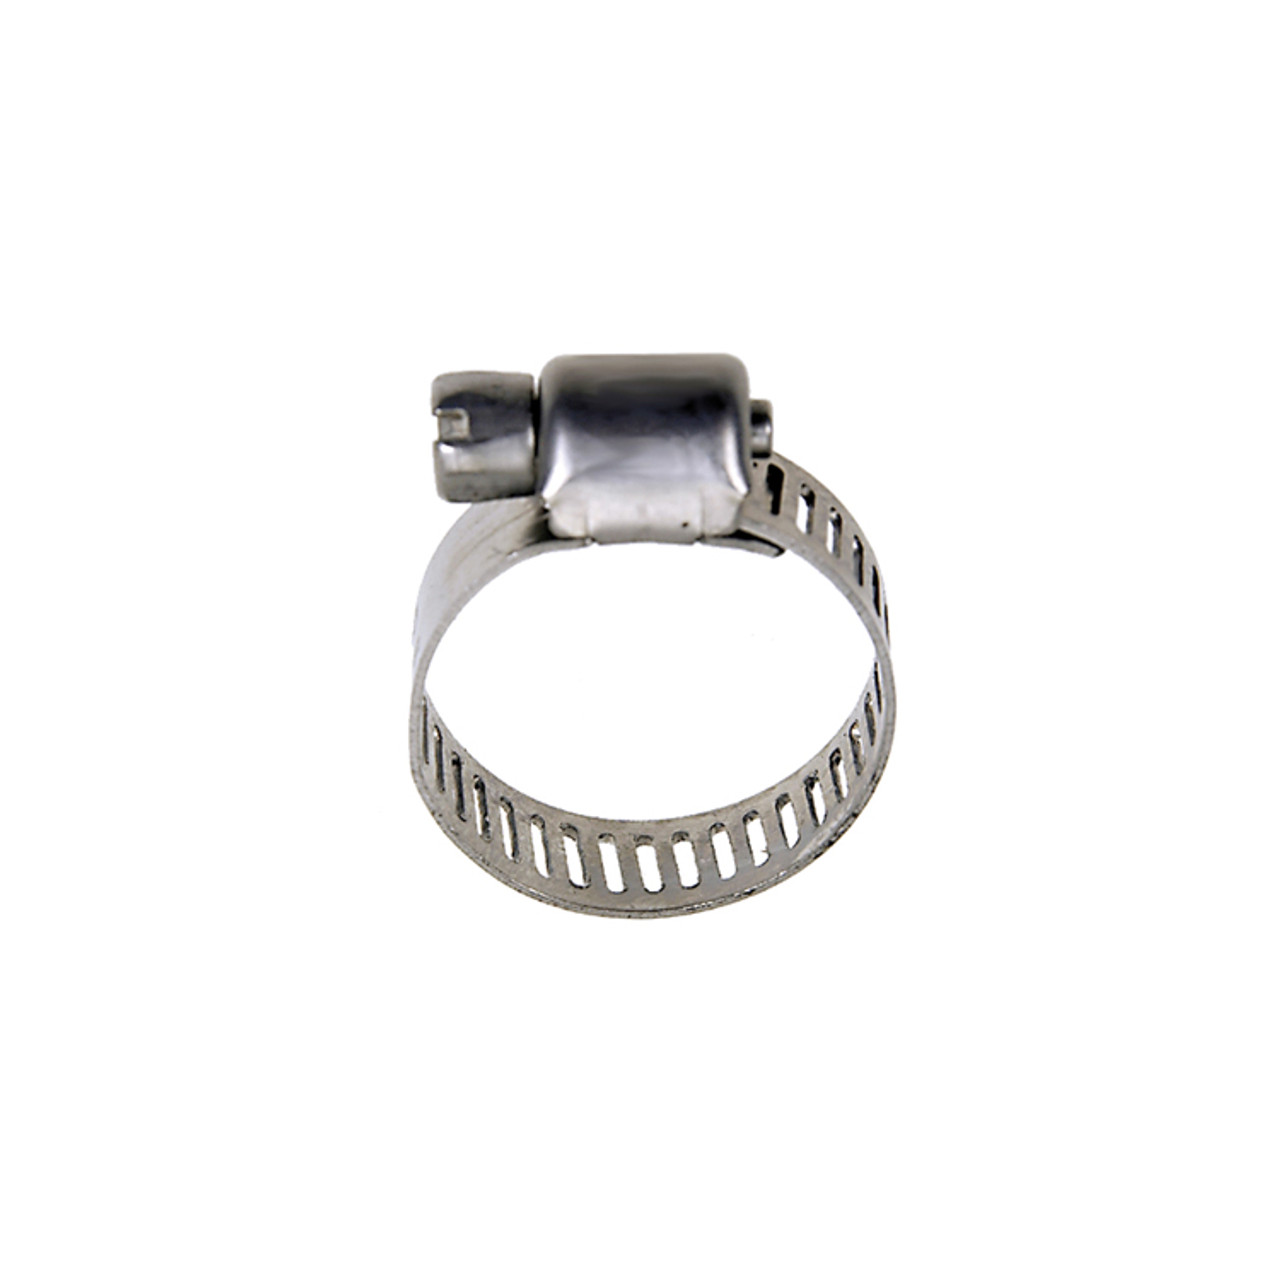 3/8" Stainless Steel Micro Worm Gear Hose Clamp   G5M-06